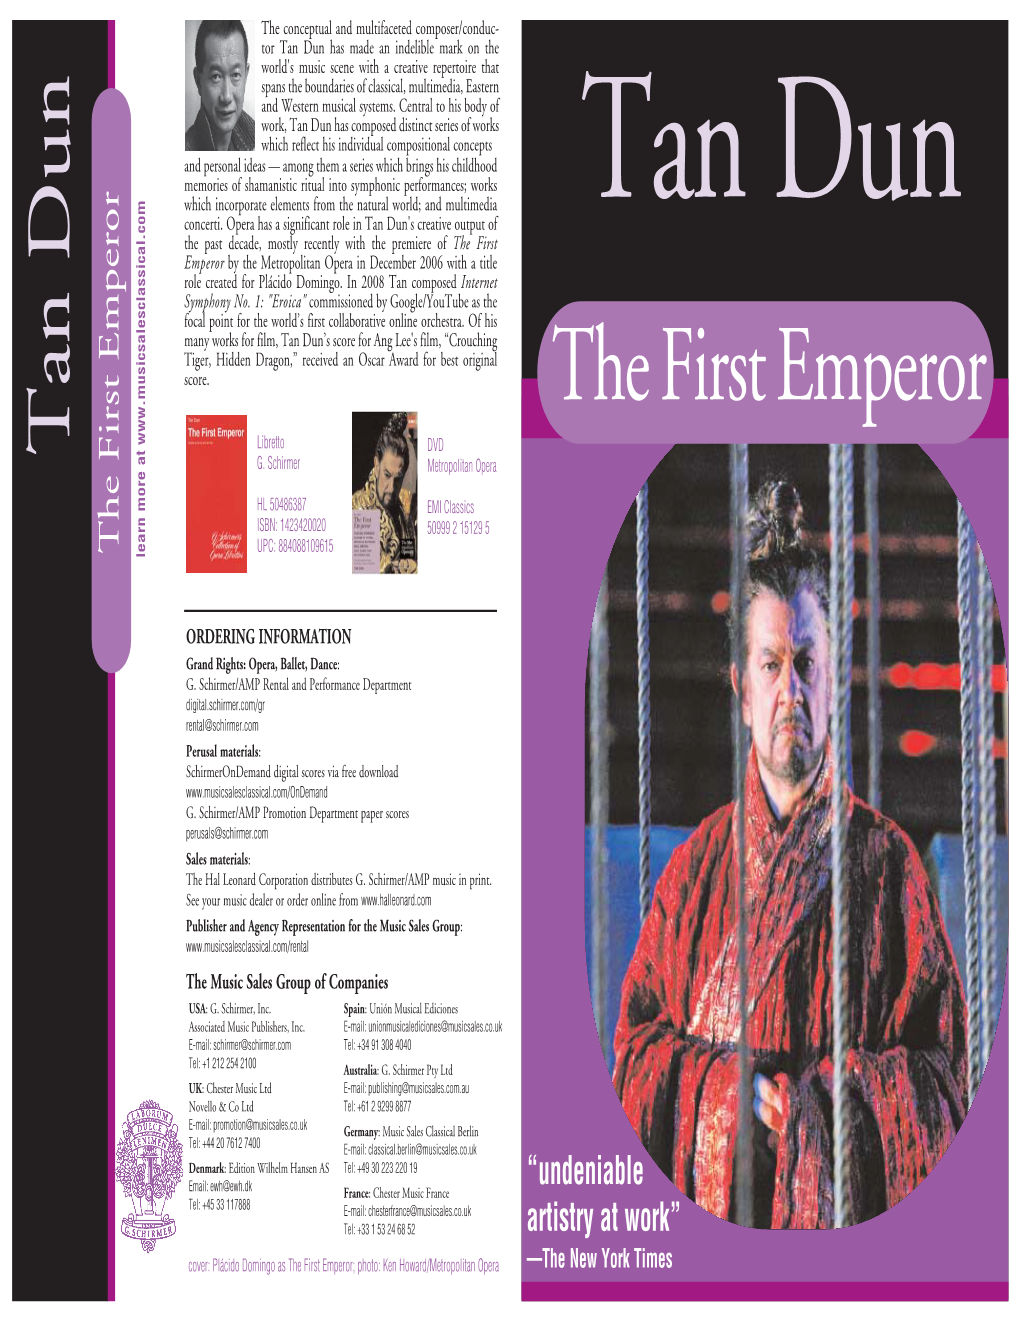 The First Emperor by the Metropolitan Opera in December 2006 with a Title Role Created for Plácido Domingo